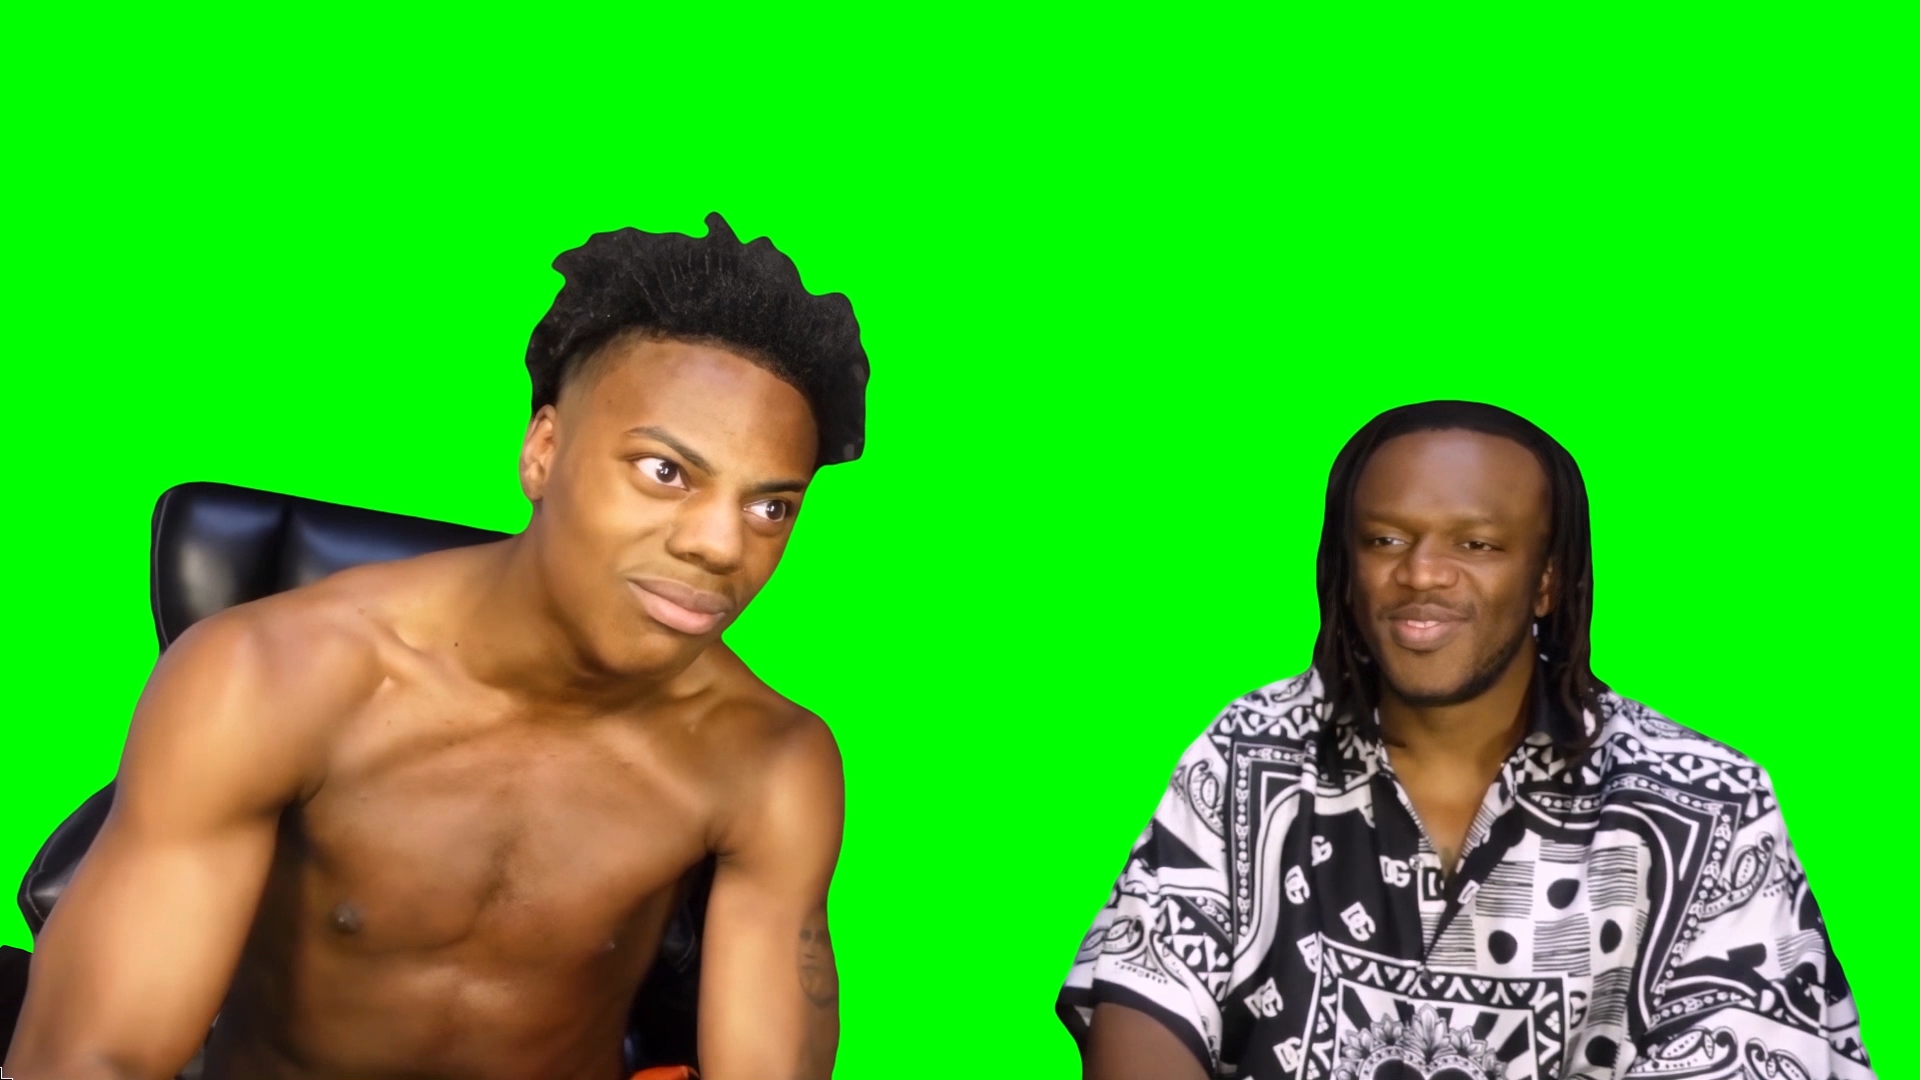 IShowSpeed laughing at KSI's big forehead (Green Screen)